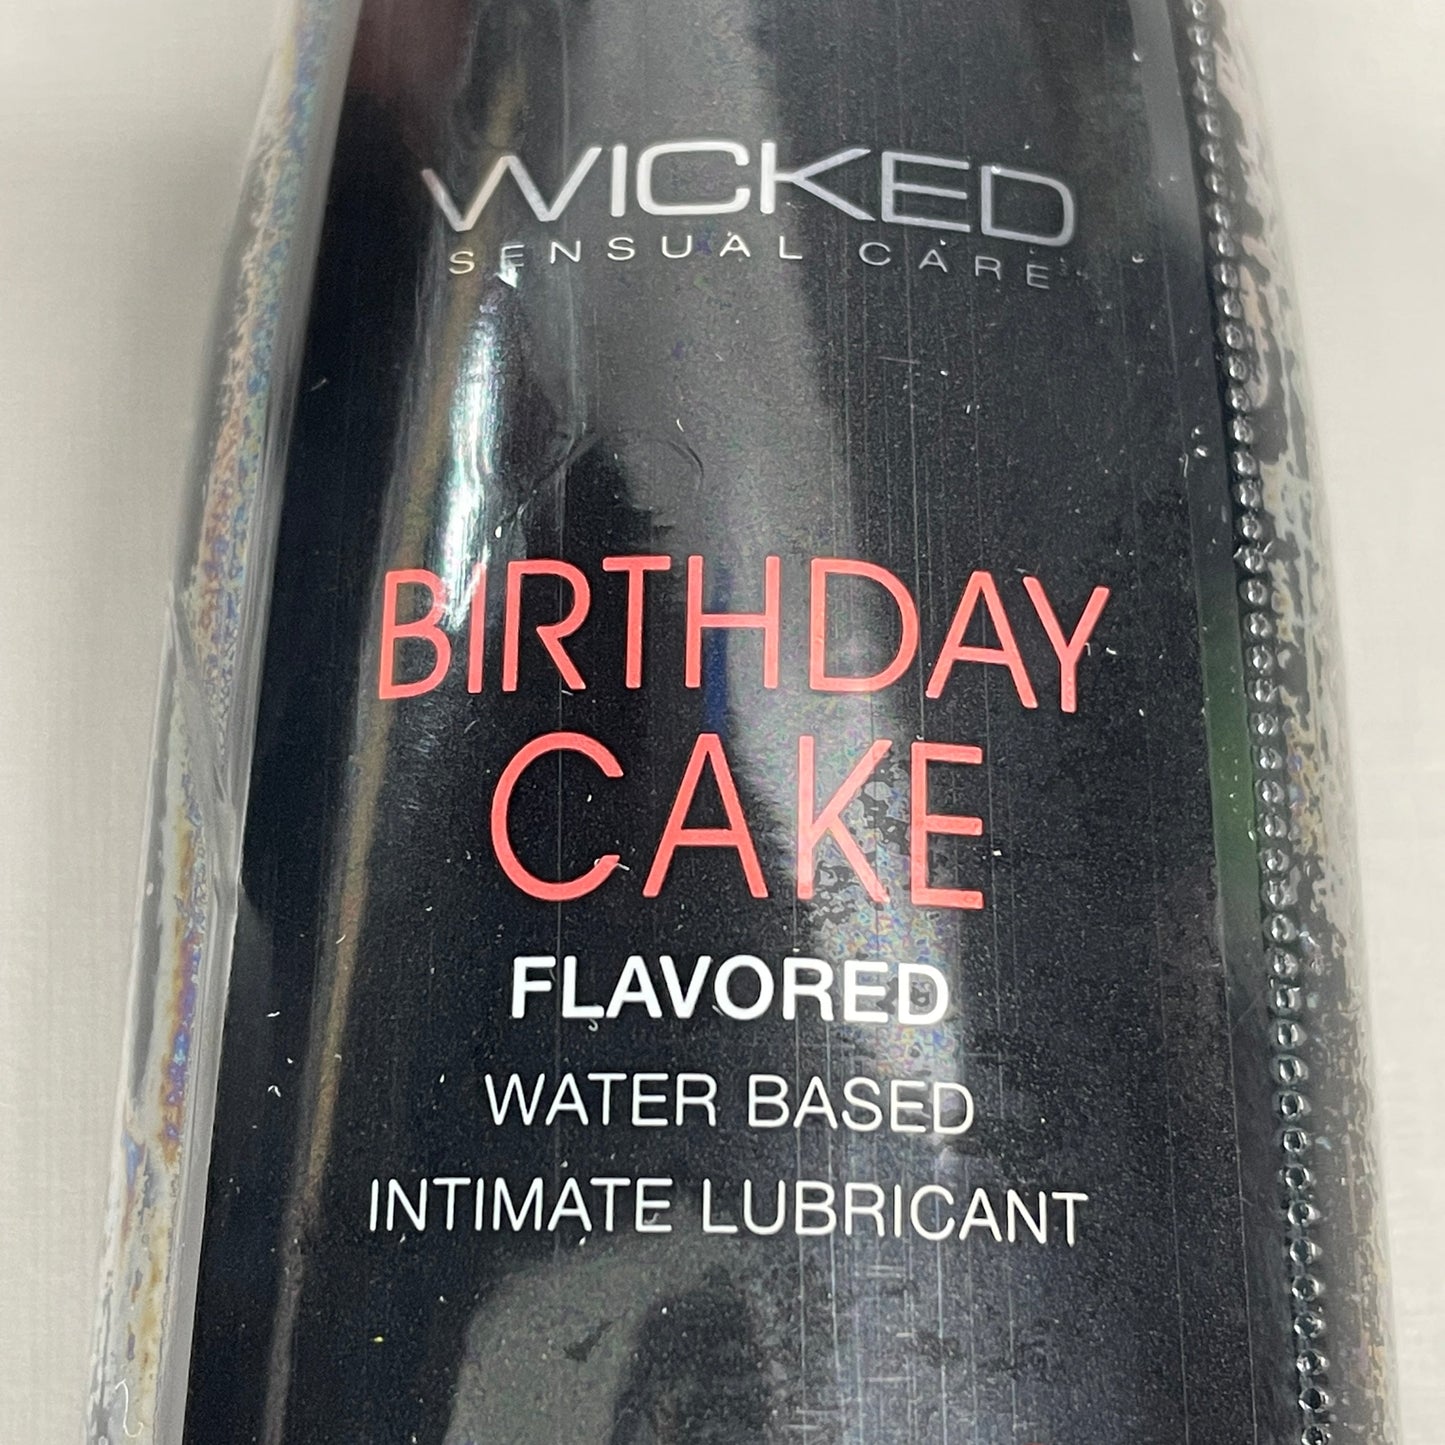 WICKED SENSUAL CARE 4PK Birthday Cake Flavored Water Based Intimate Lubricant 2 oz 03/24 (New)